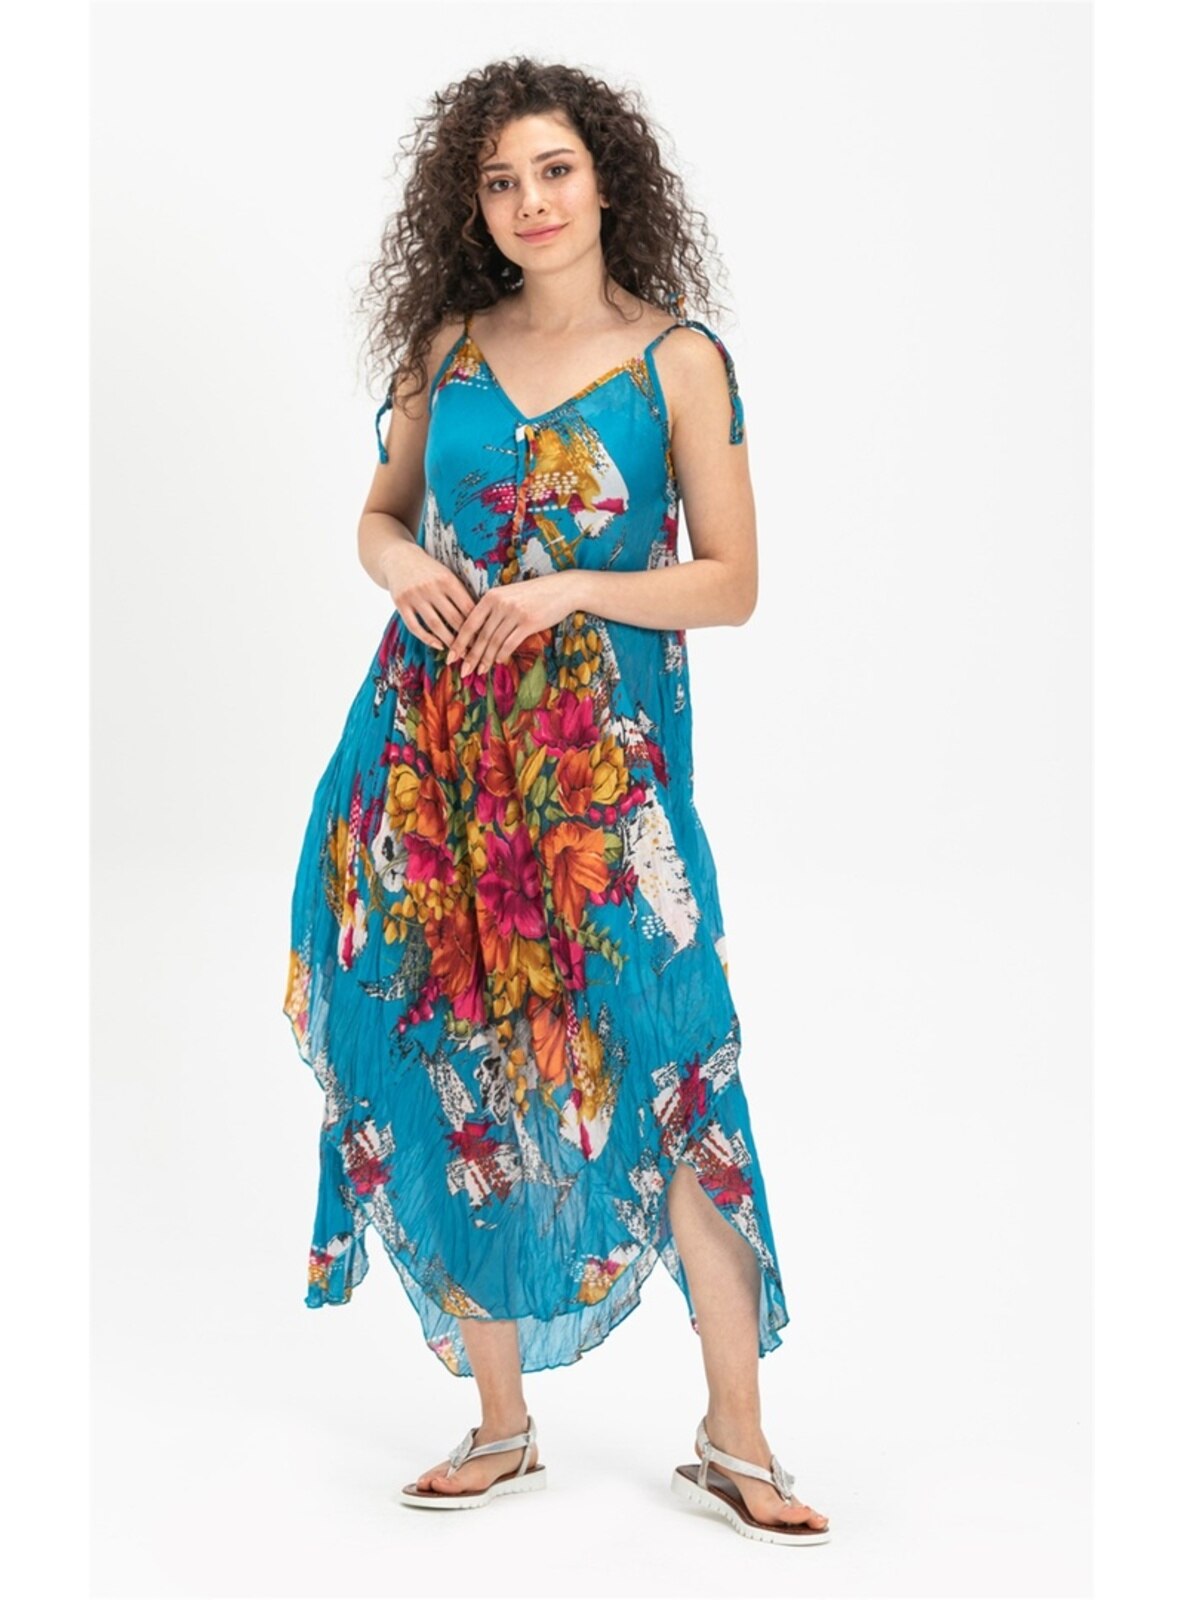 Fully Lined - Turquoise - Beach Dress